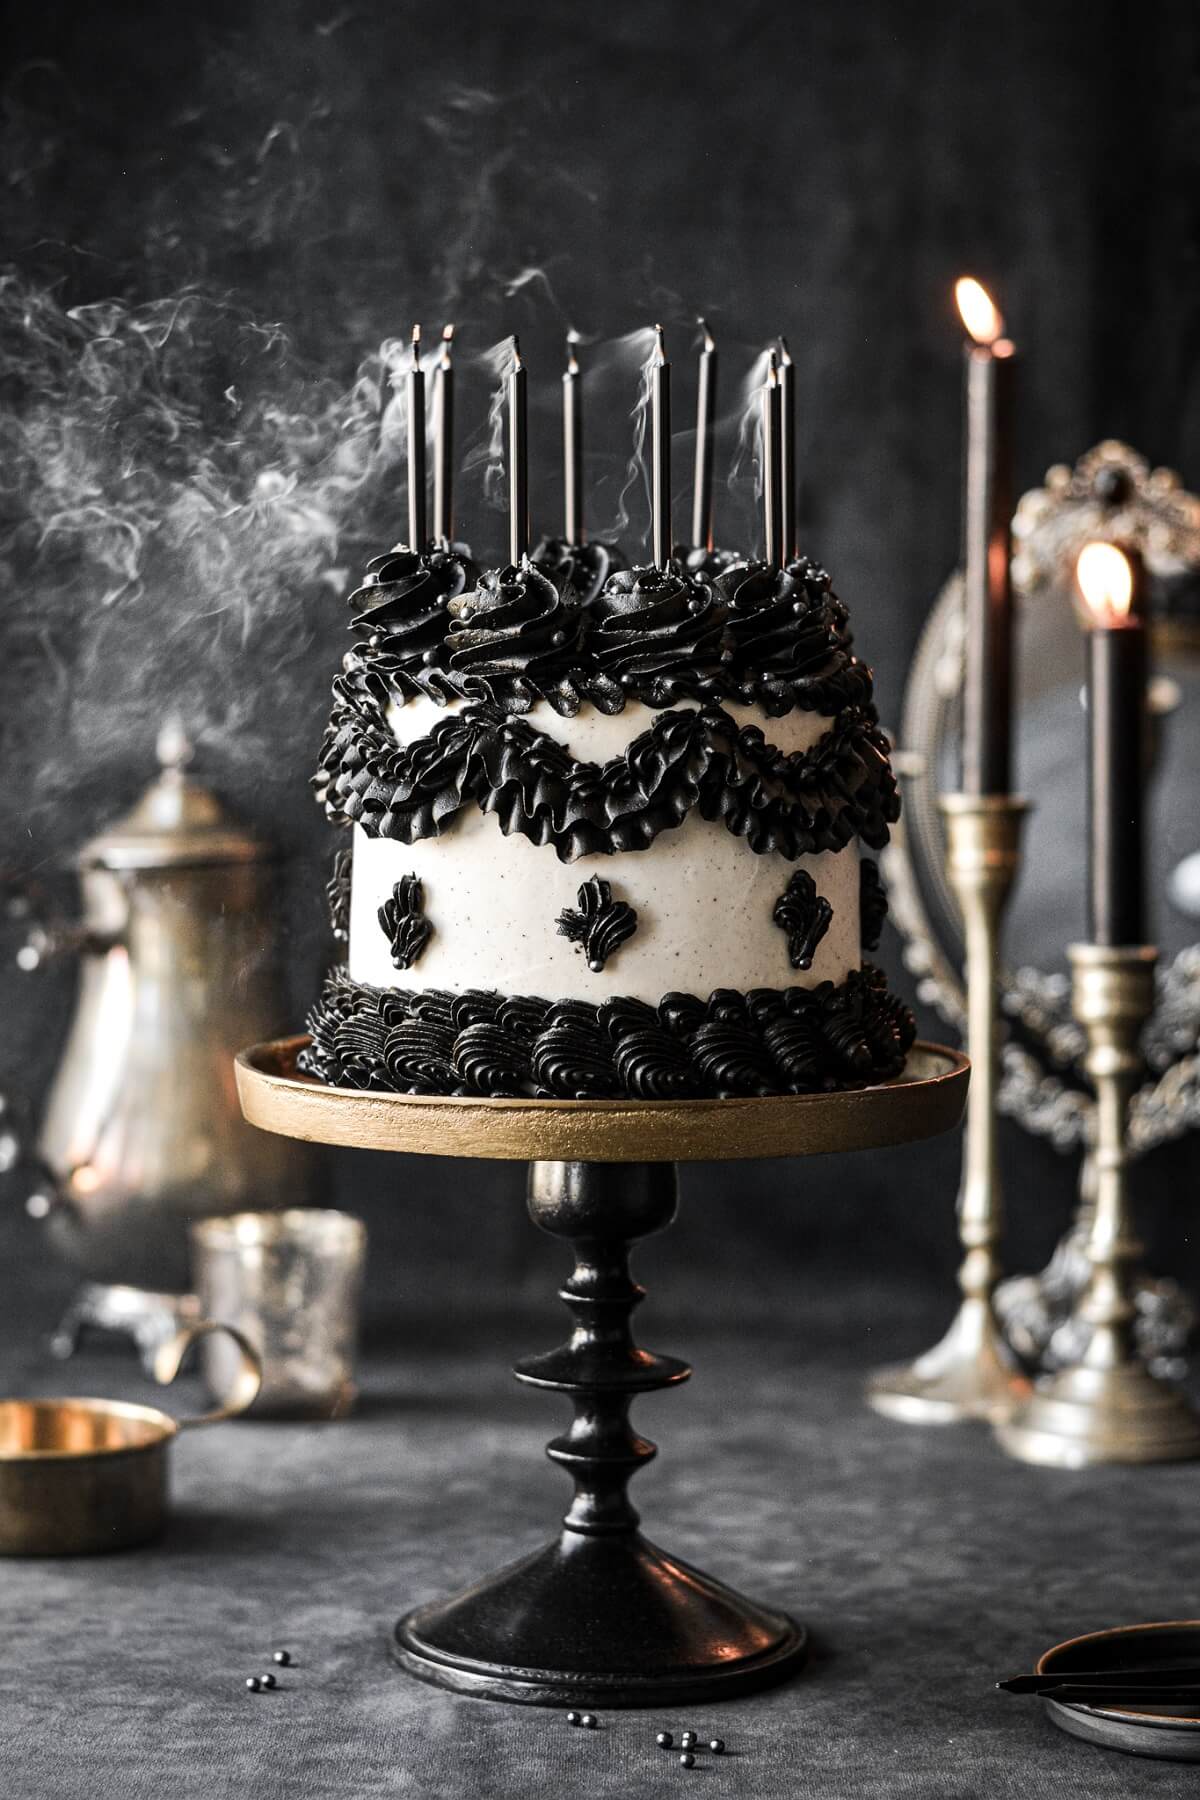 Smoke drifting off candles on top of a black and white Lambeth cake.